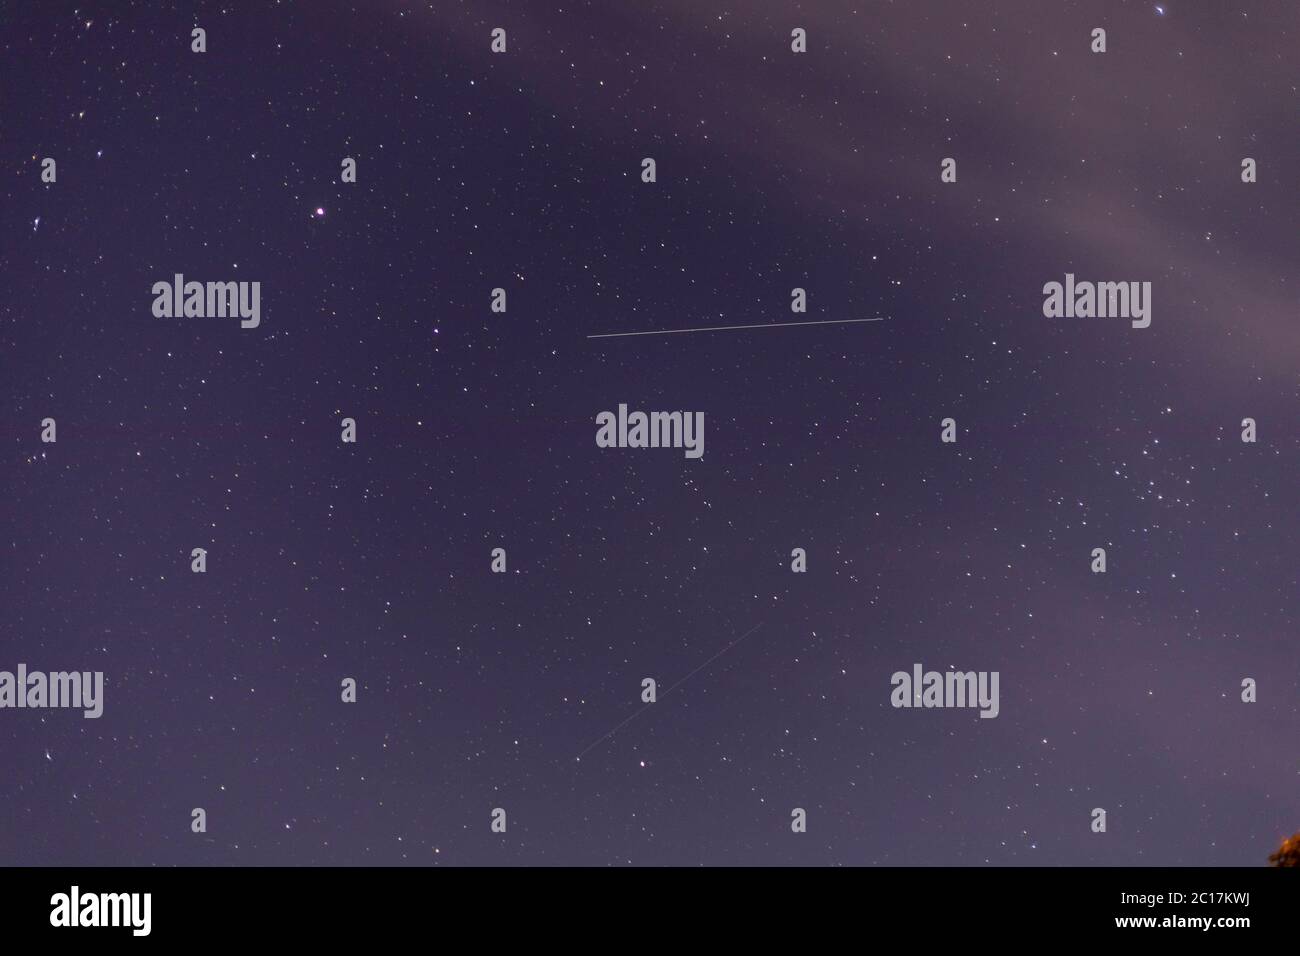 Hailsham, UK. 14th Jun 2020. Starlink satellites seen over clear skies this evening in East Sussex. The satellites are constructed by Spacex and aim to provide internet access across the globe. Hailsham, East Sussex,UK. Credit: Ed Brown/Alamy Live News Stock Photo